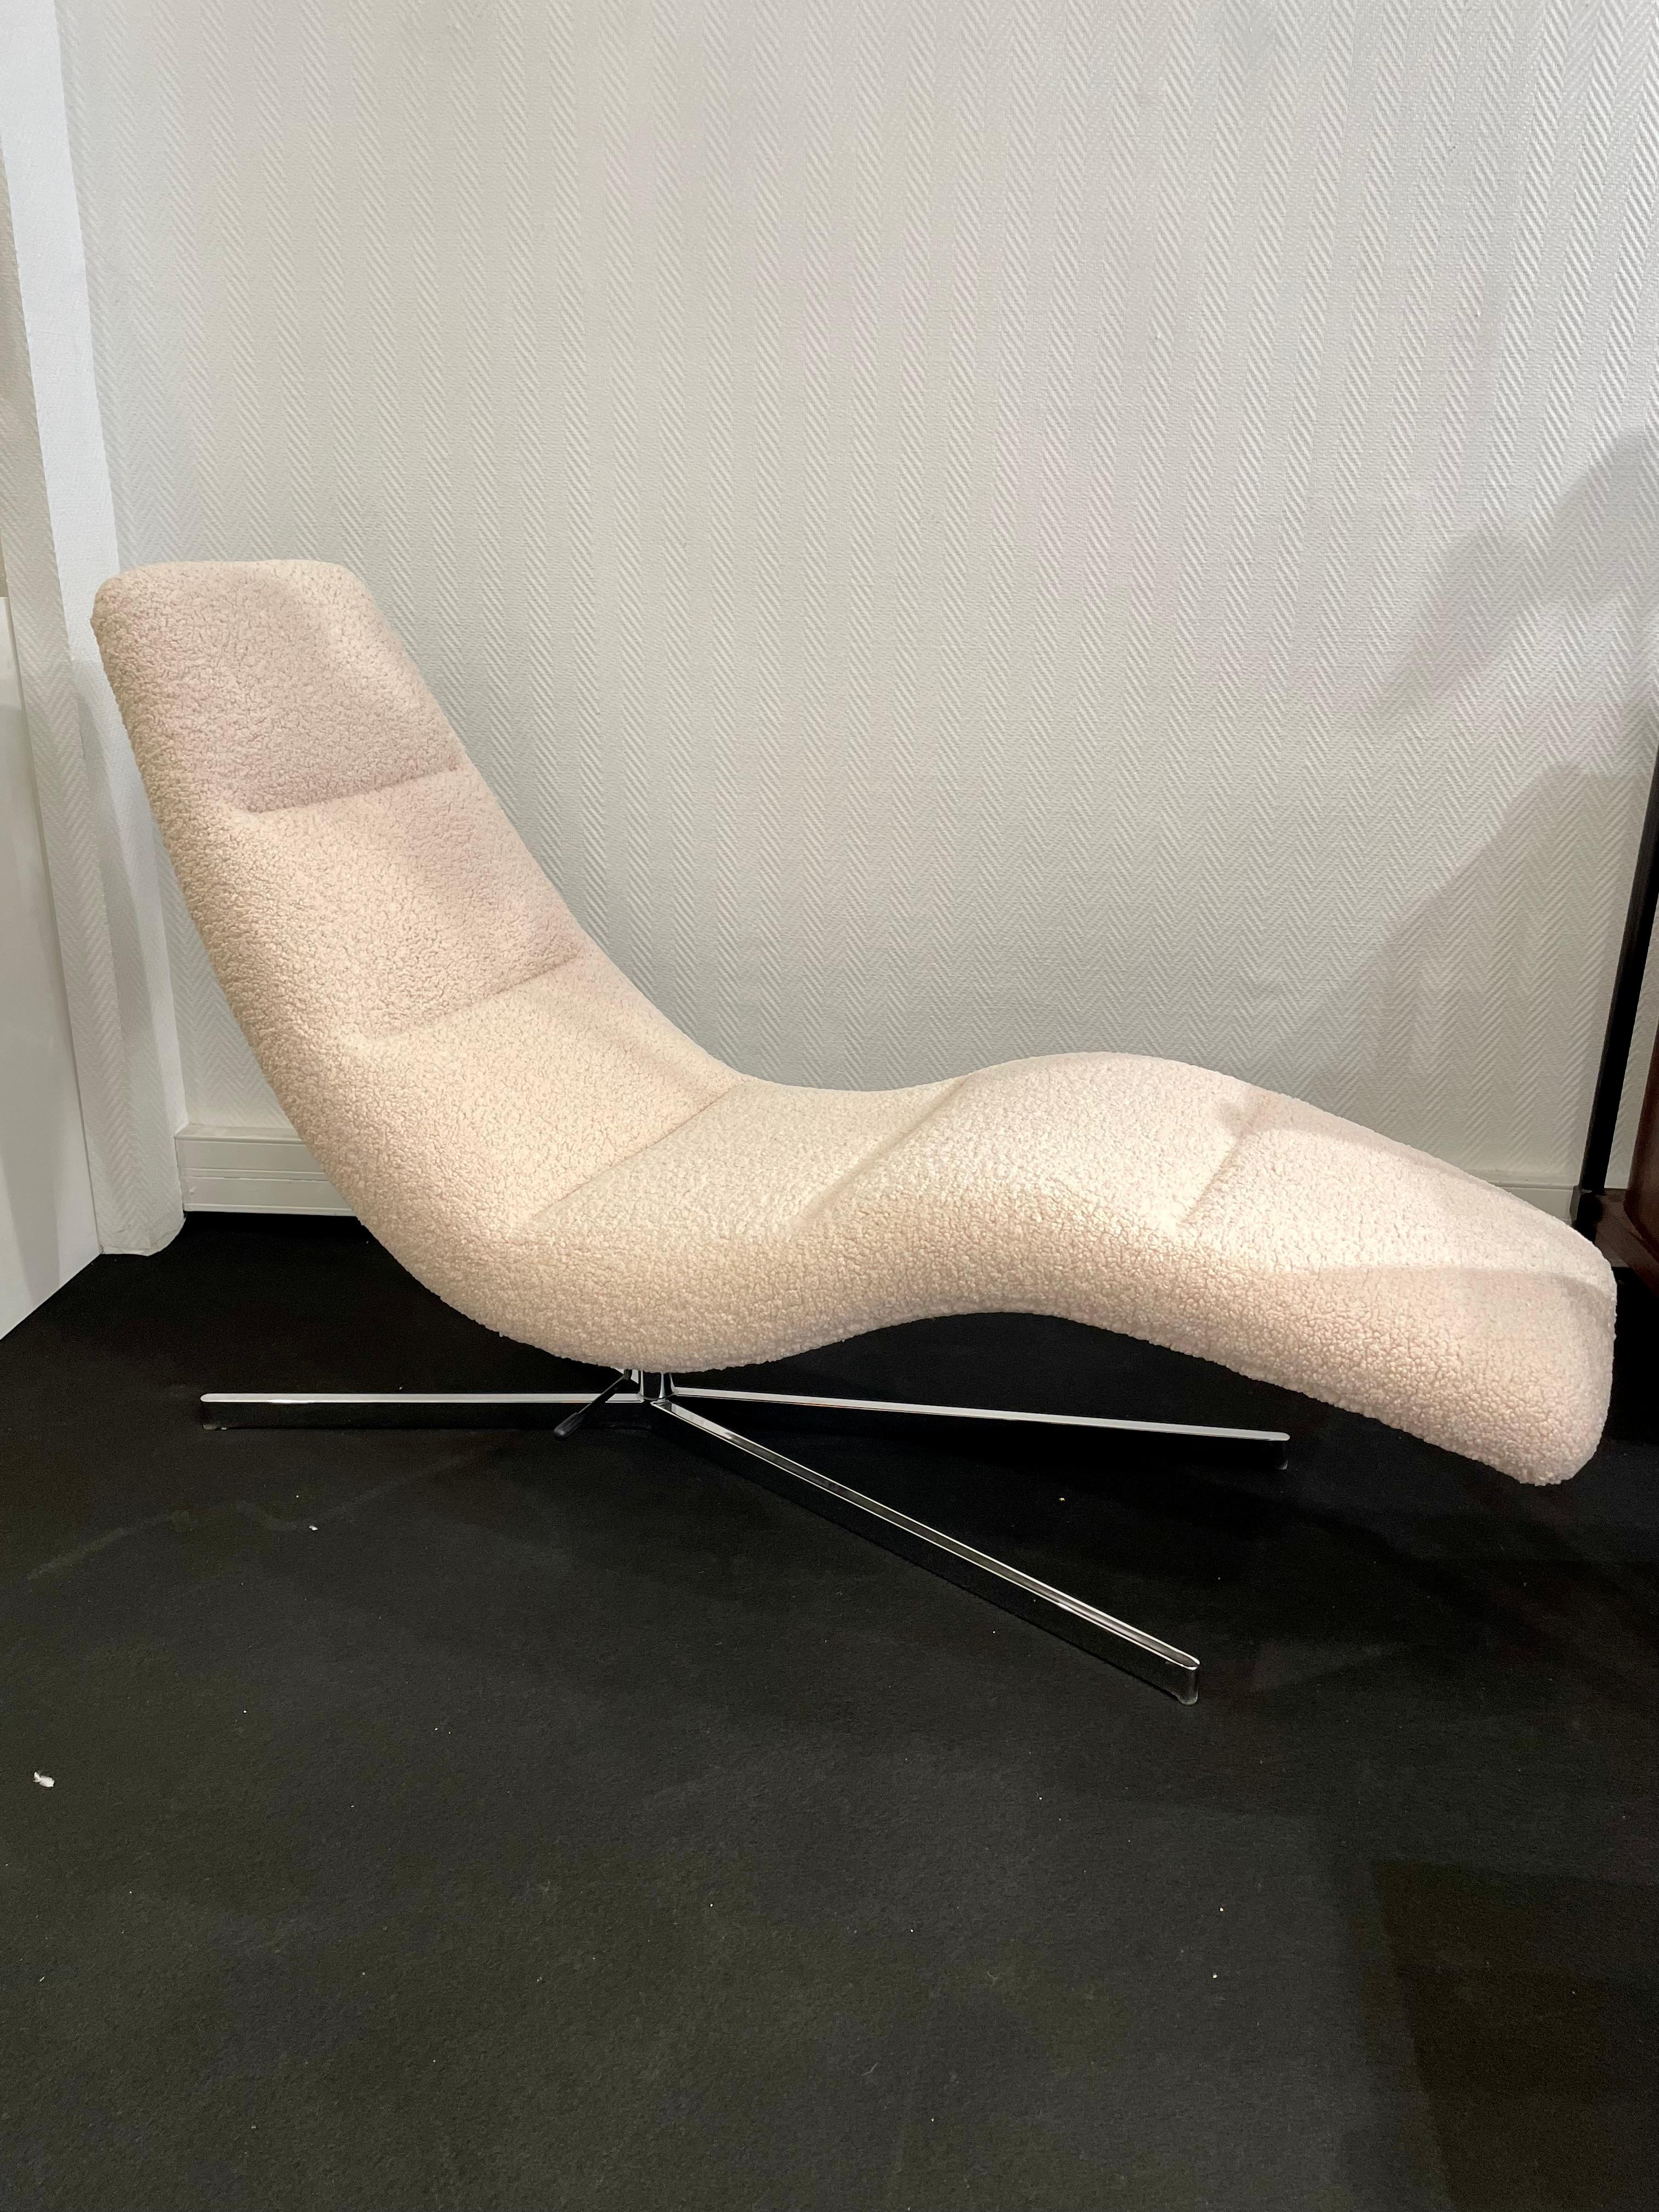 Lounge chair orientable chromed metal base
 From 1990 -2000.